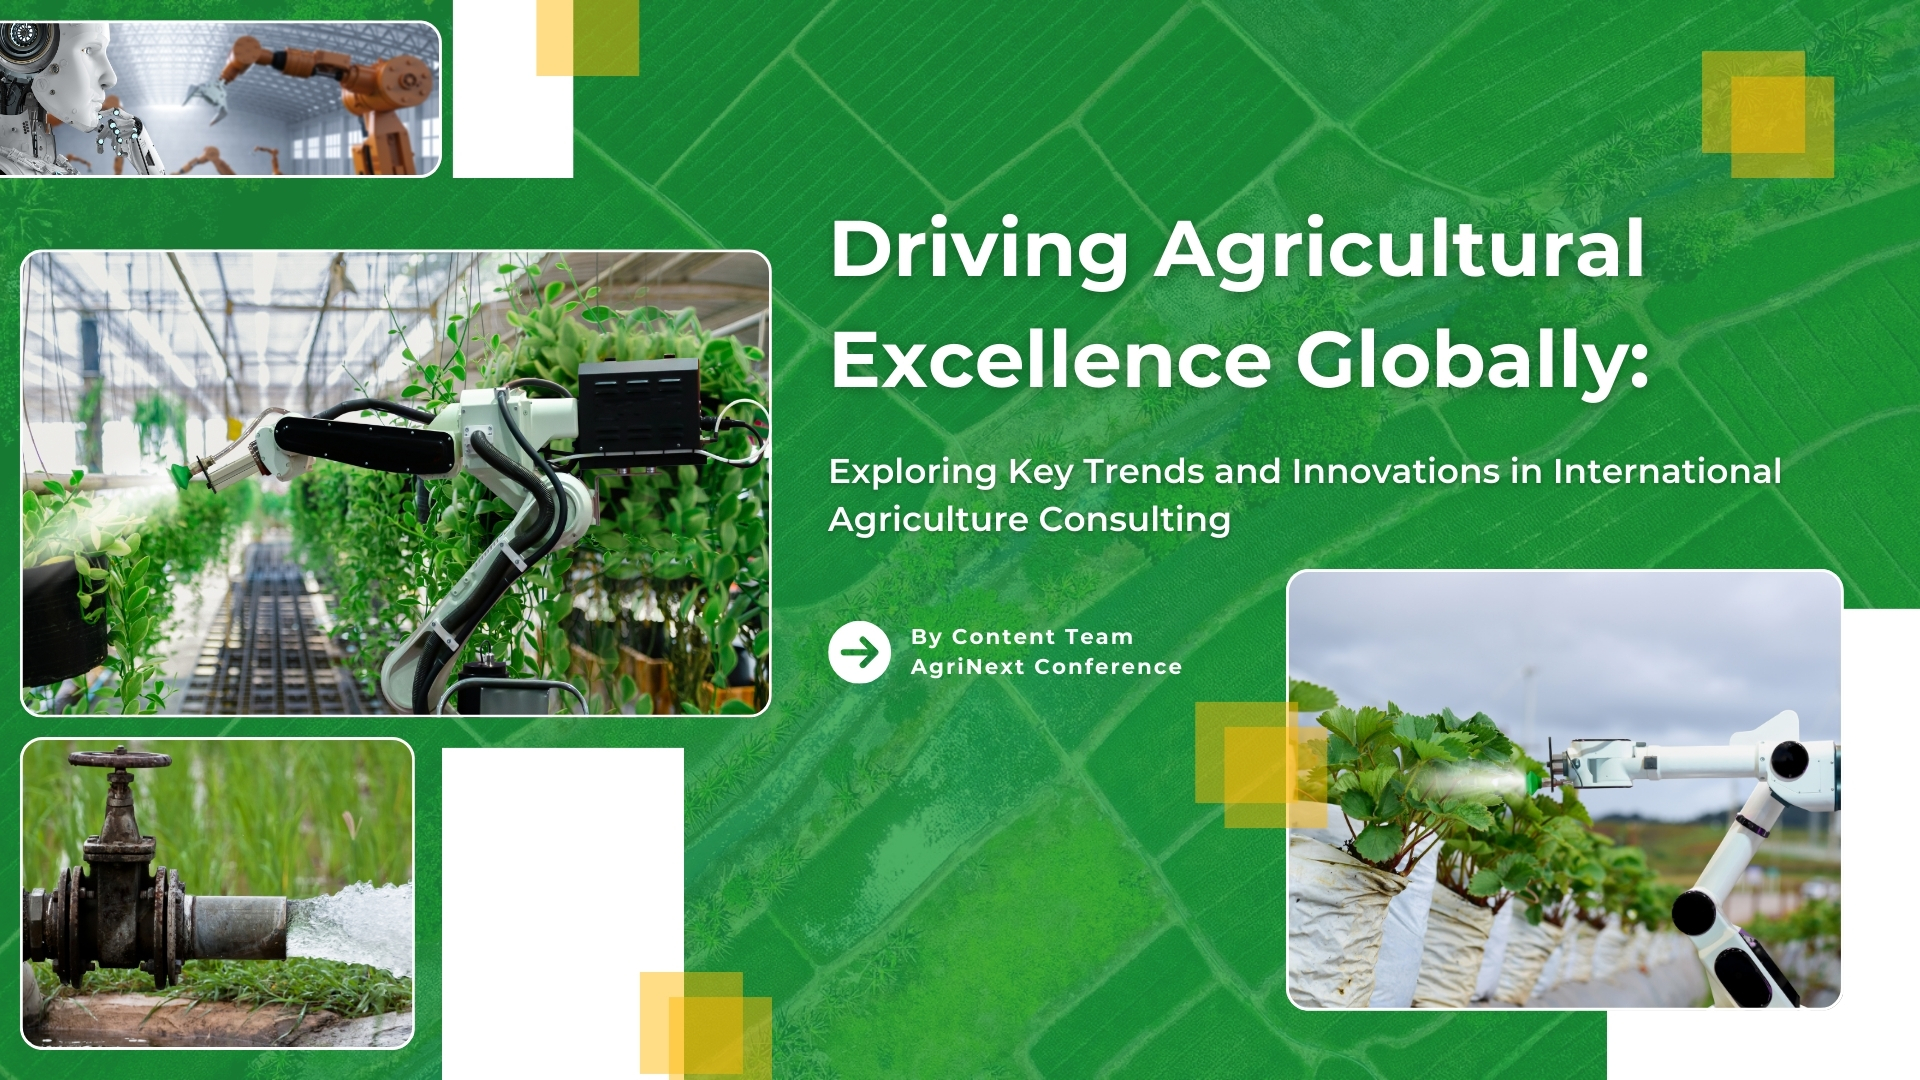 Driving Agricultural Excellence Globally: Exploring Key Trends and Innovations in International Agriculture Consulting